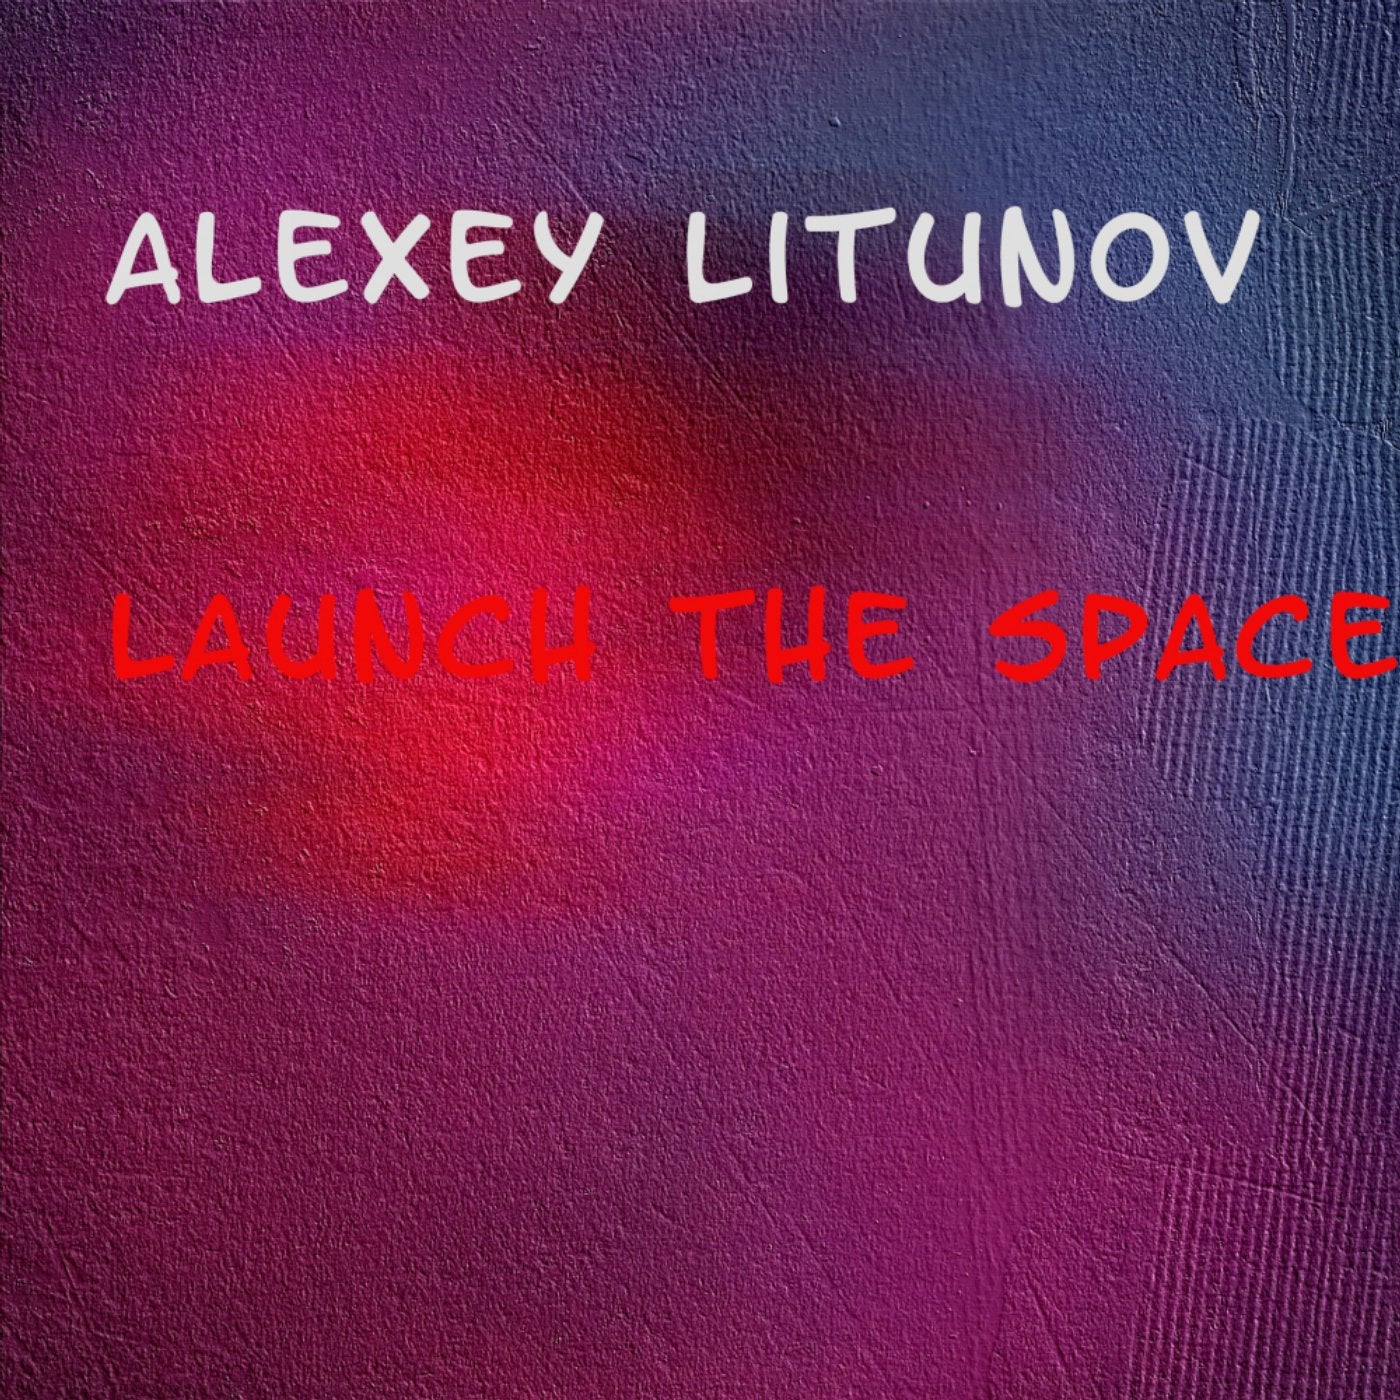 Launch The Space